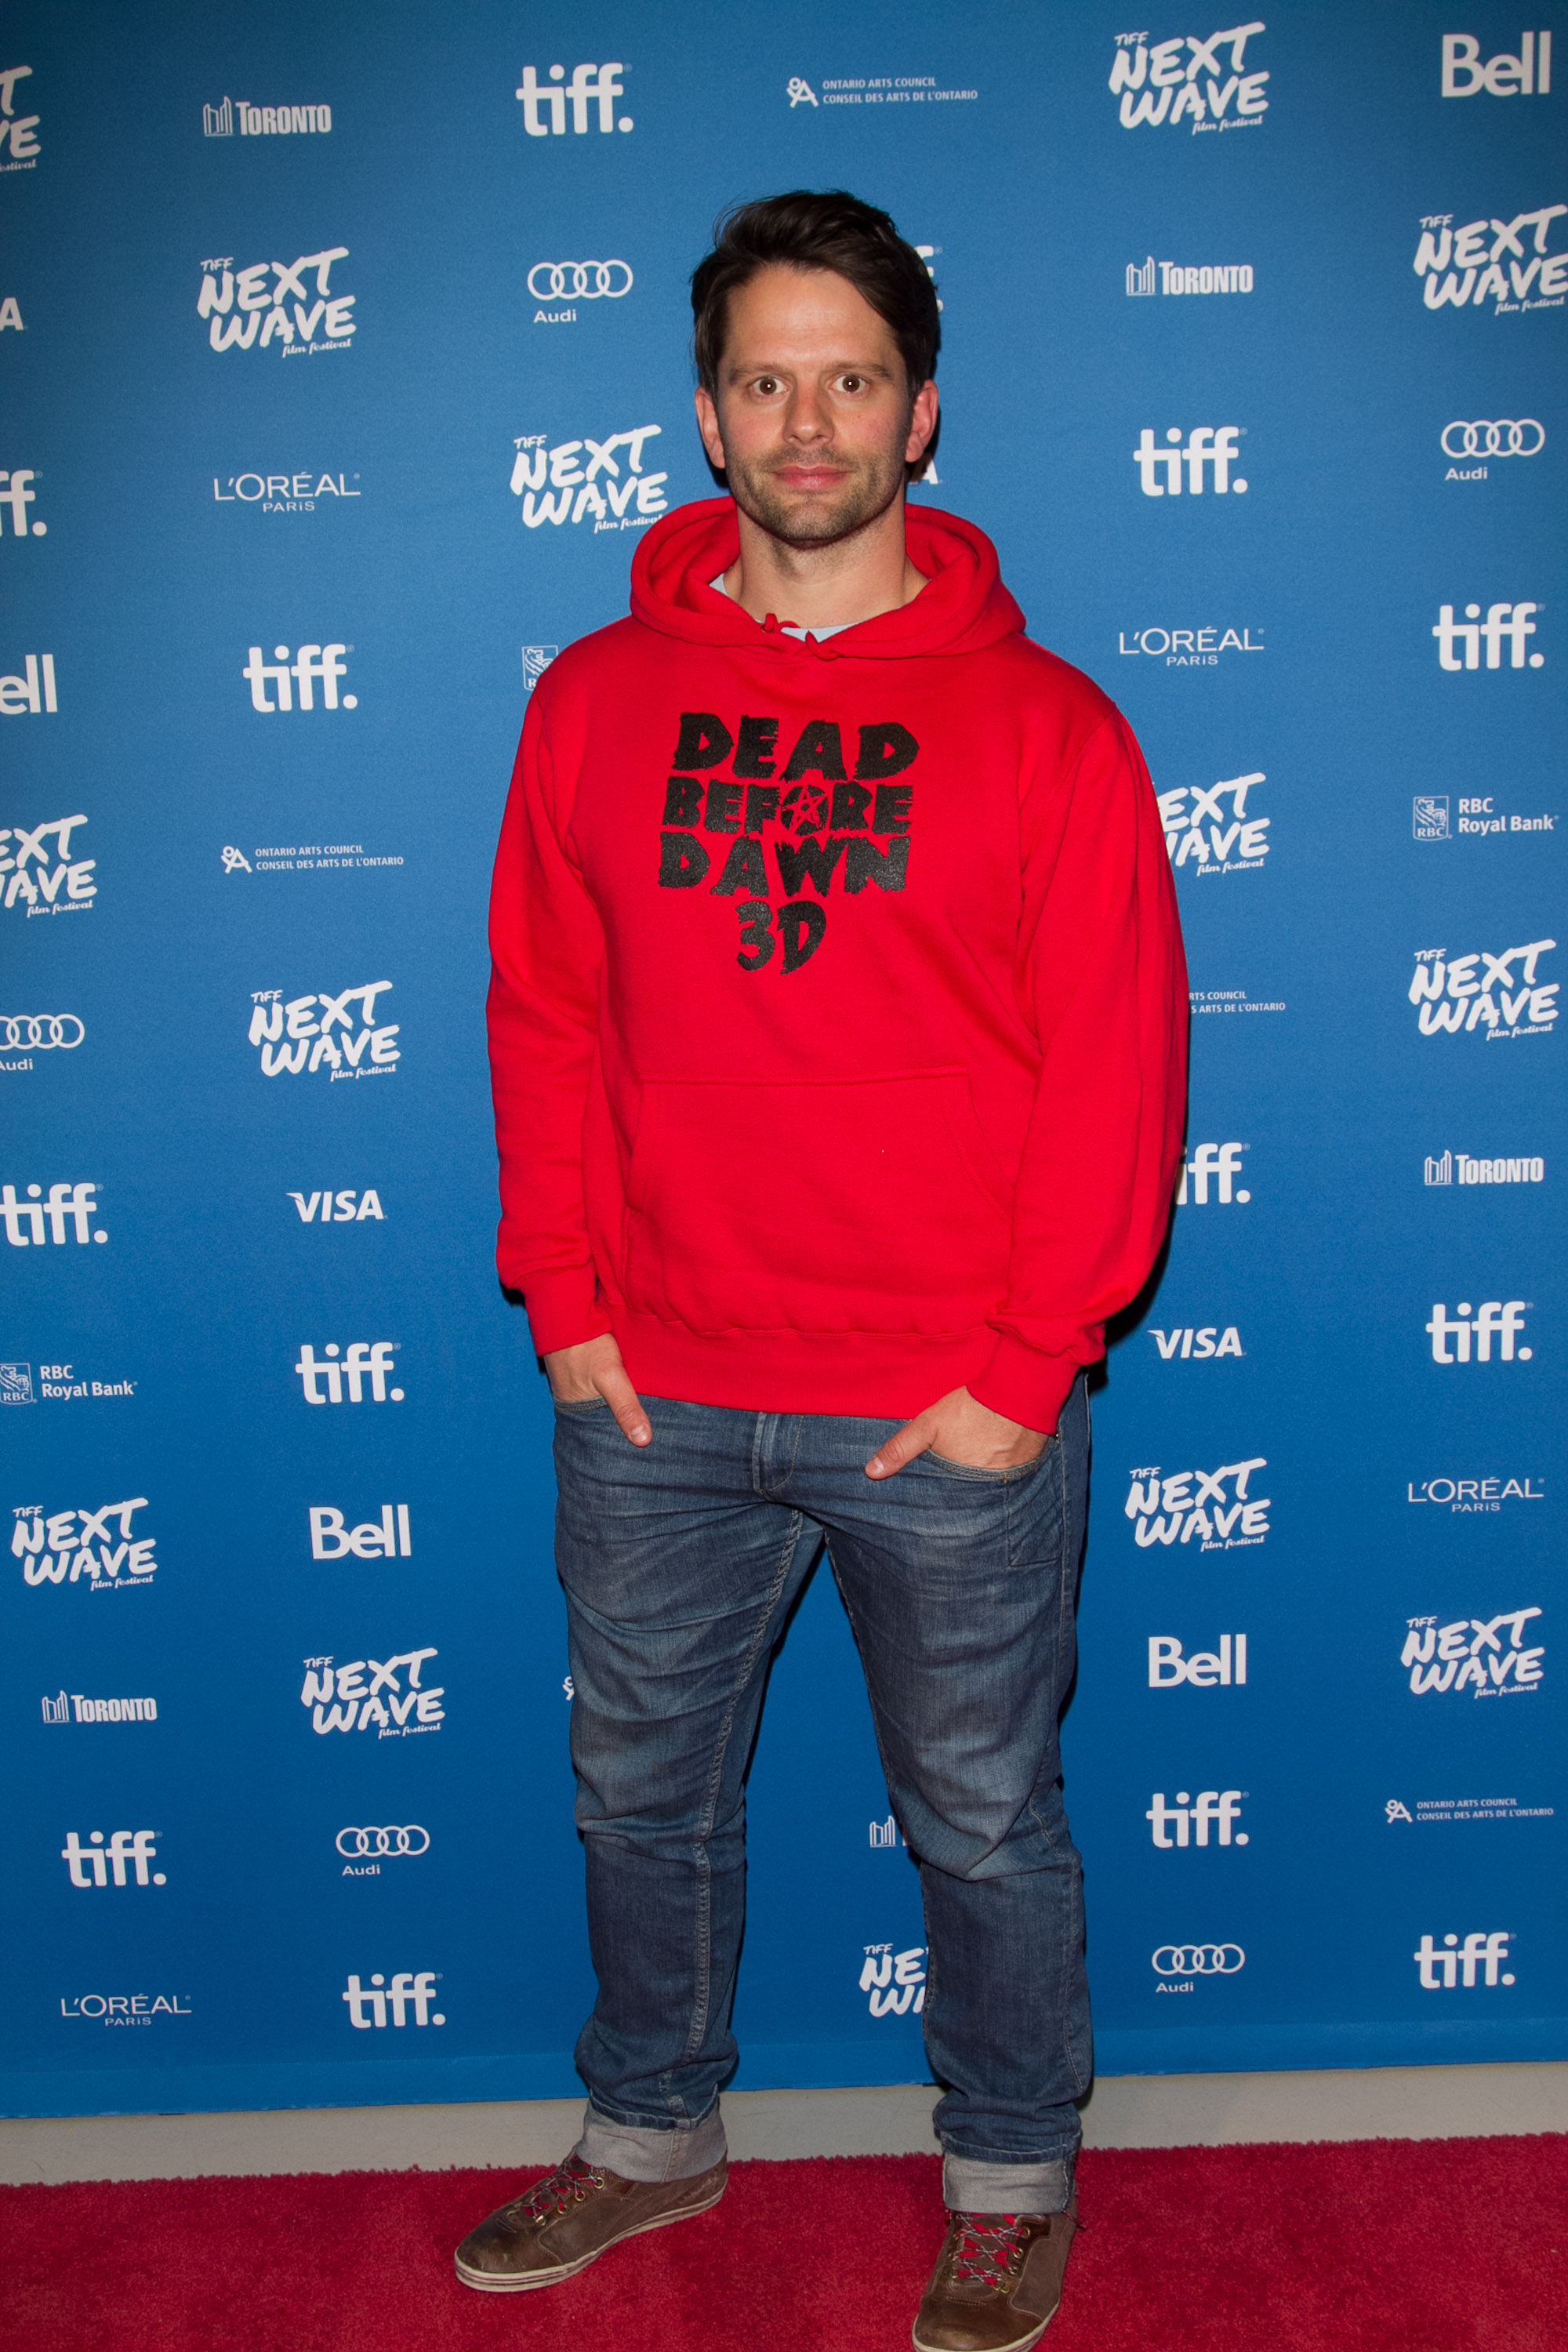 Filmmaker Tim Doiron arrives to a promotional event for Dead Before Dawn 3D at the TIFF Next Wave Film Festival, 2013.